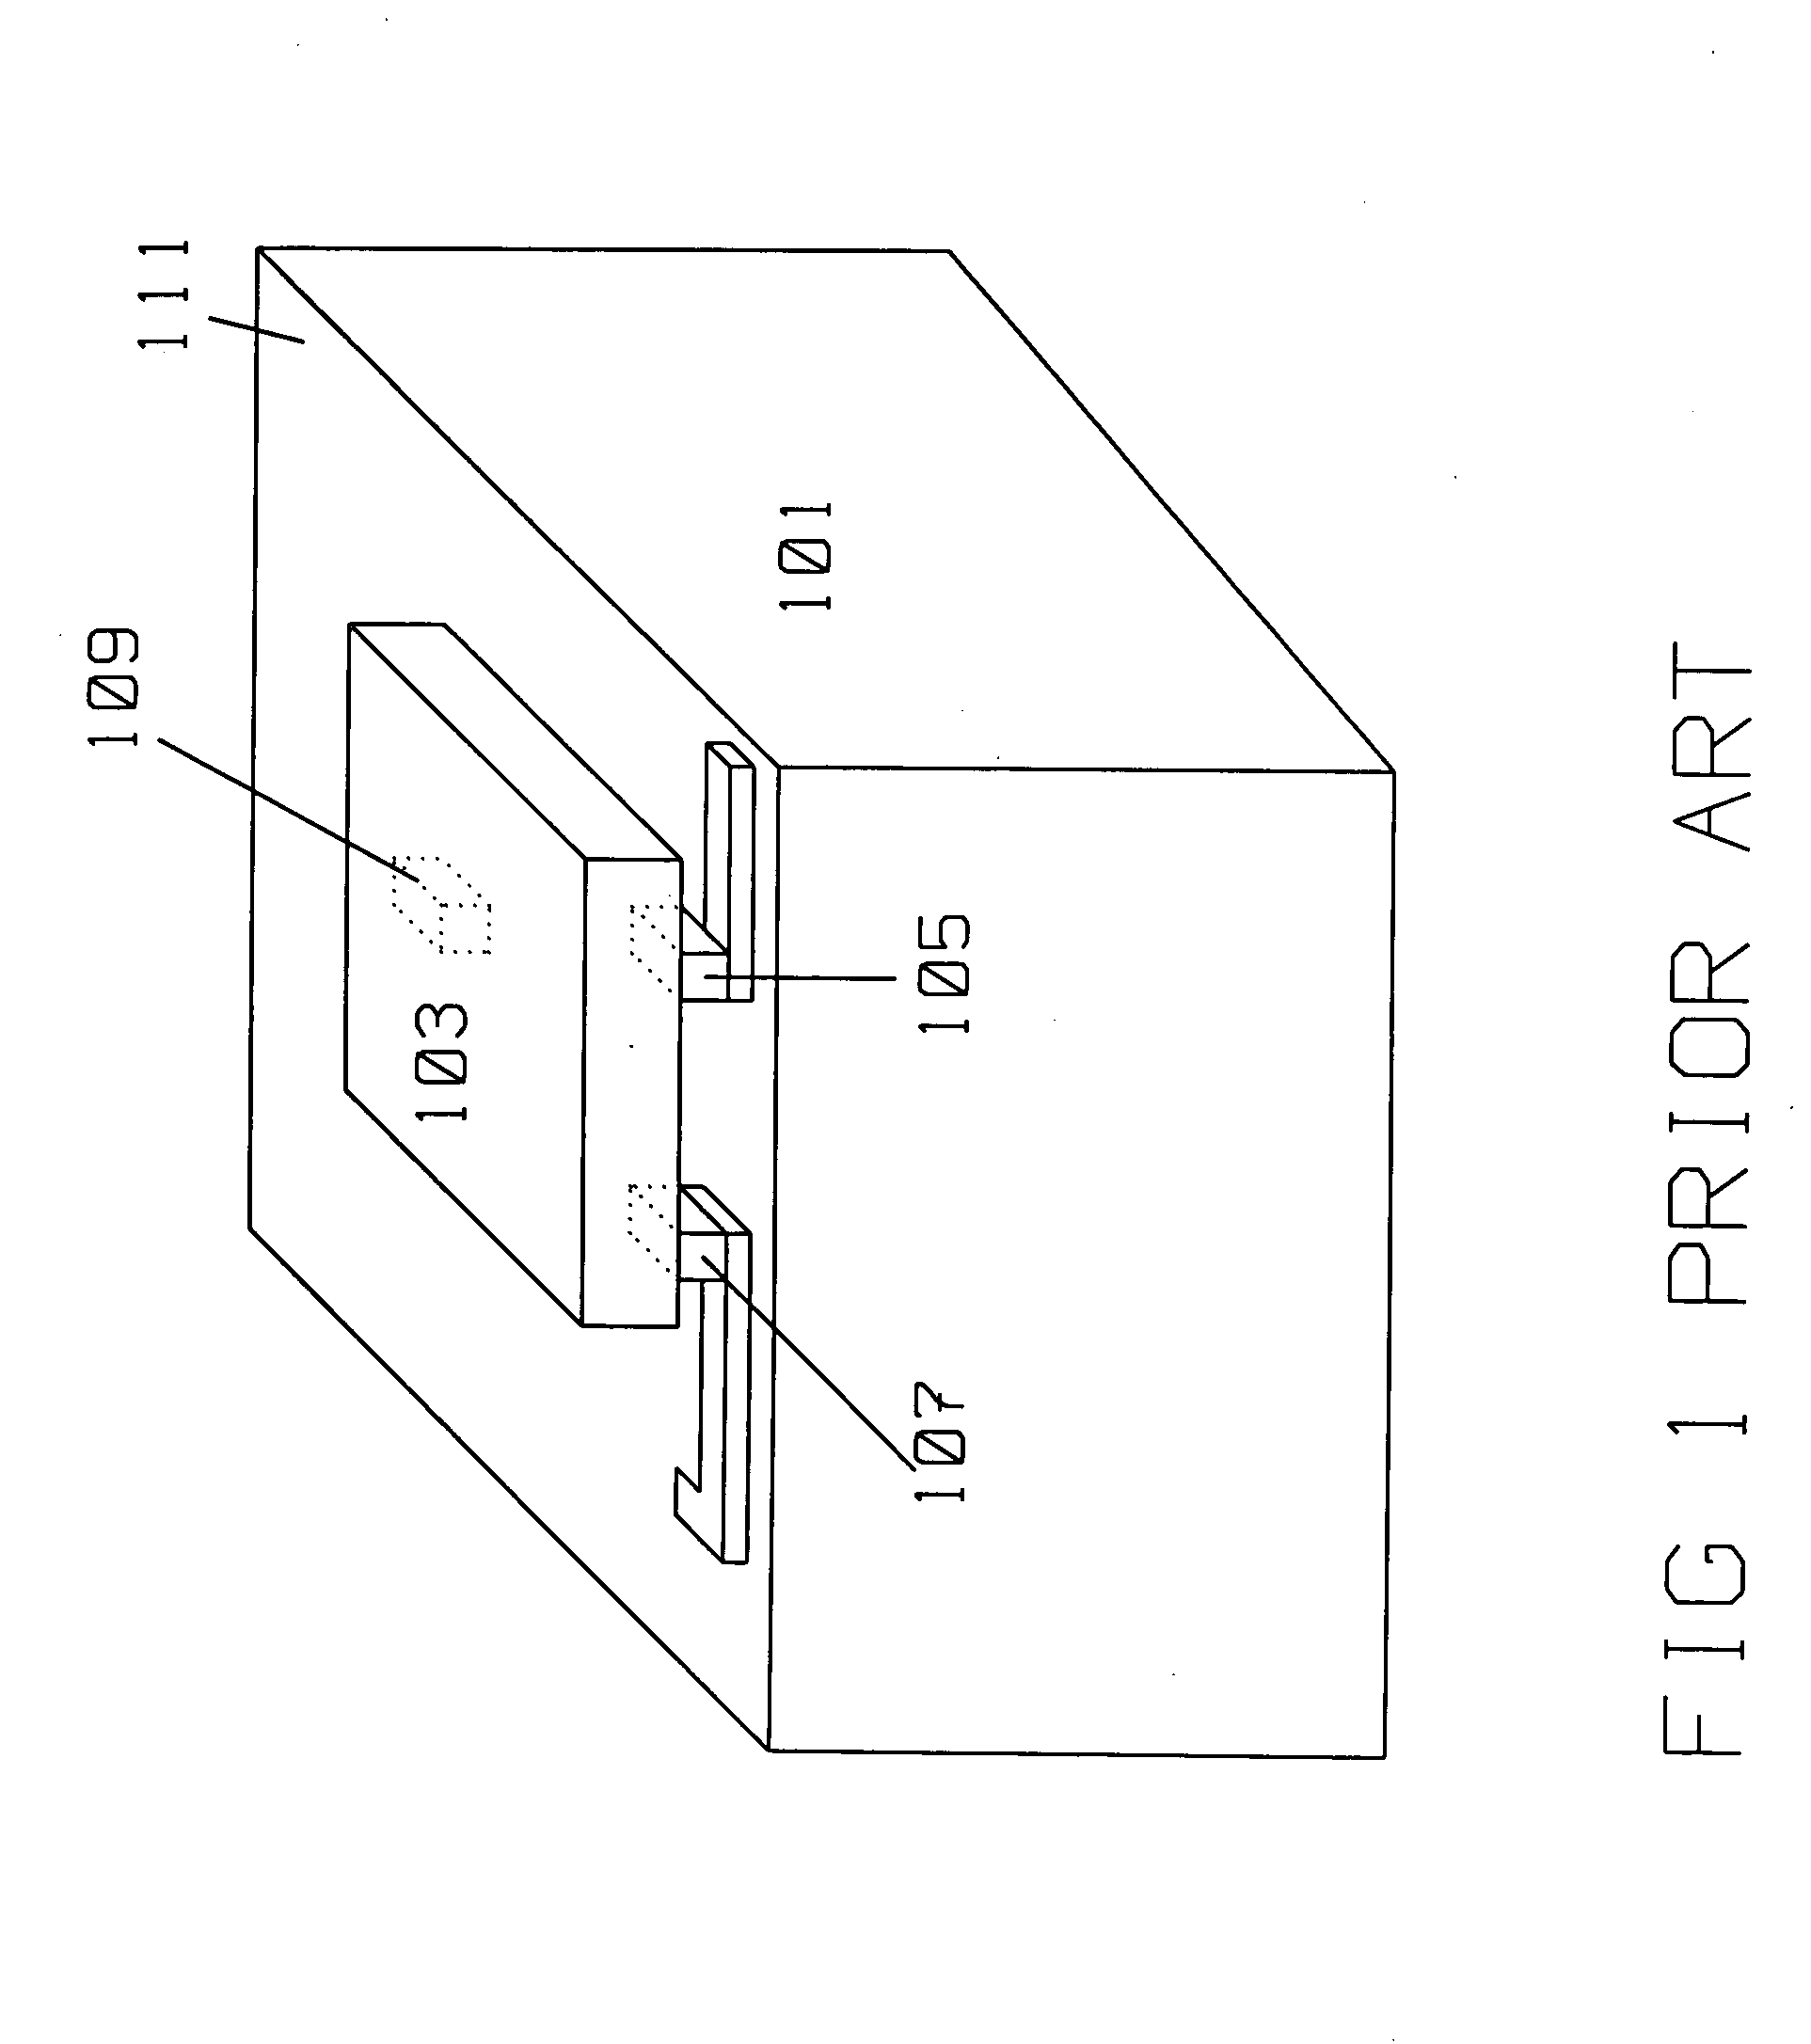 Periodic interleaved star with vias electromagnetic bandgap structure for microstrip and flip chip on board applications